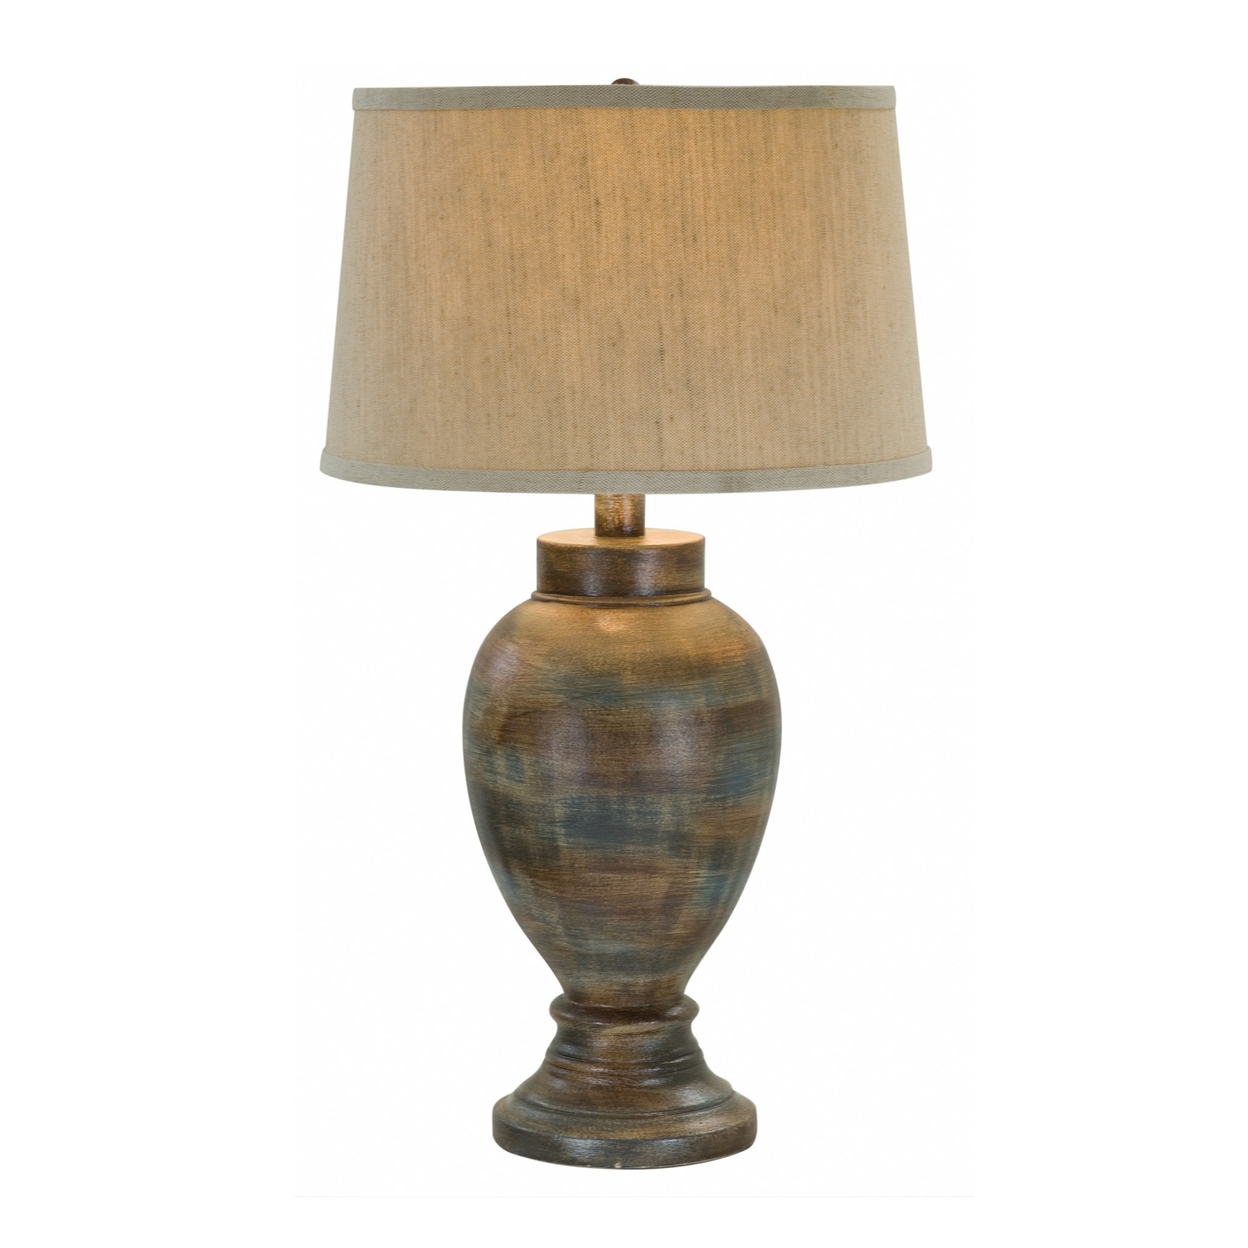 30 Inch Hydrocal Table Lamp, Drum Shade, Classic Urn Base, Brown And Blue- Saltoro Sherpi